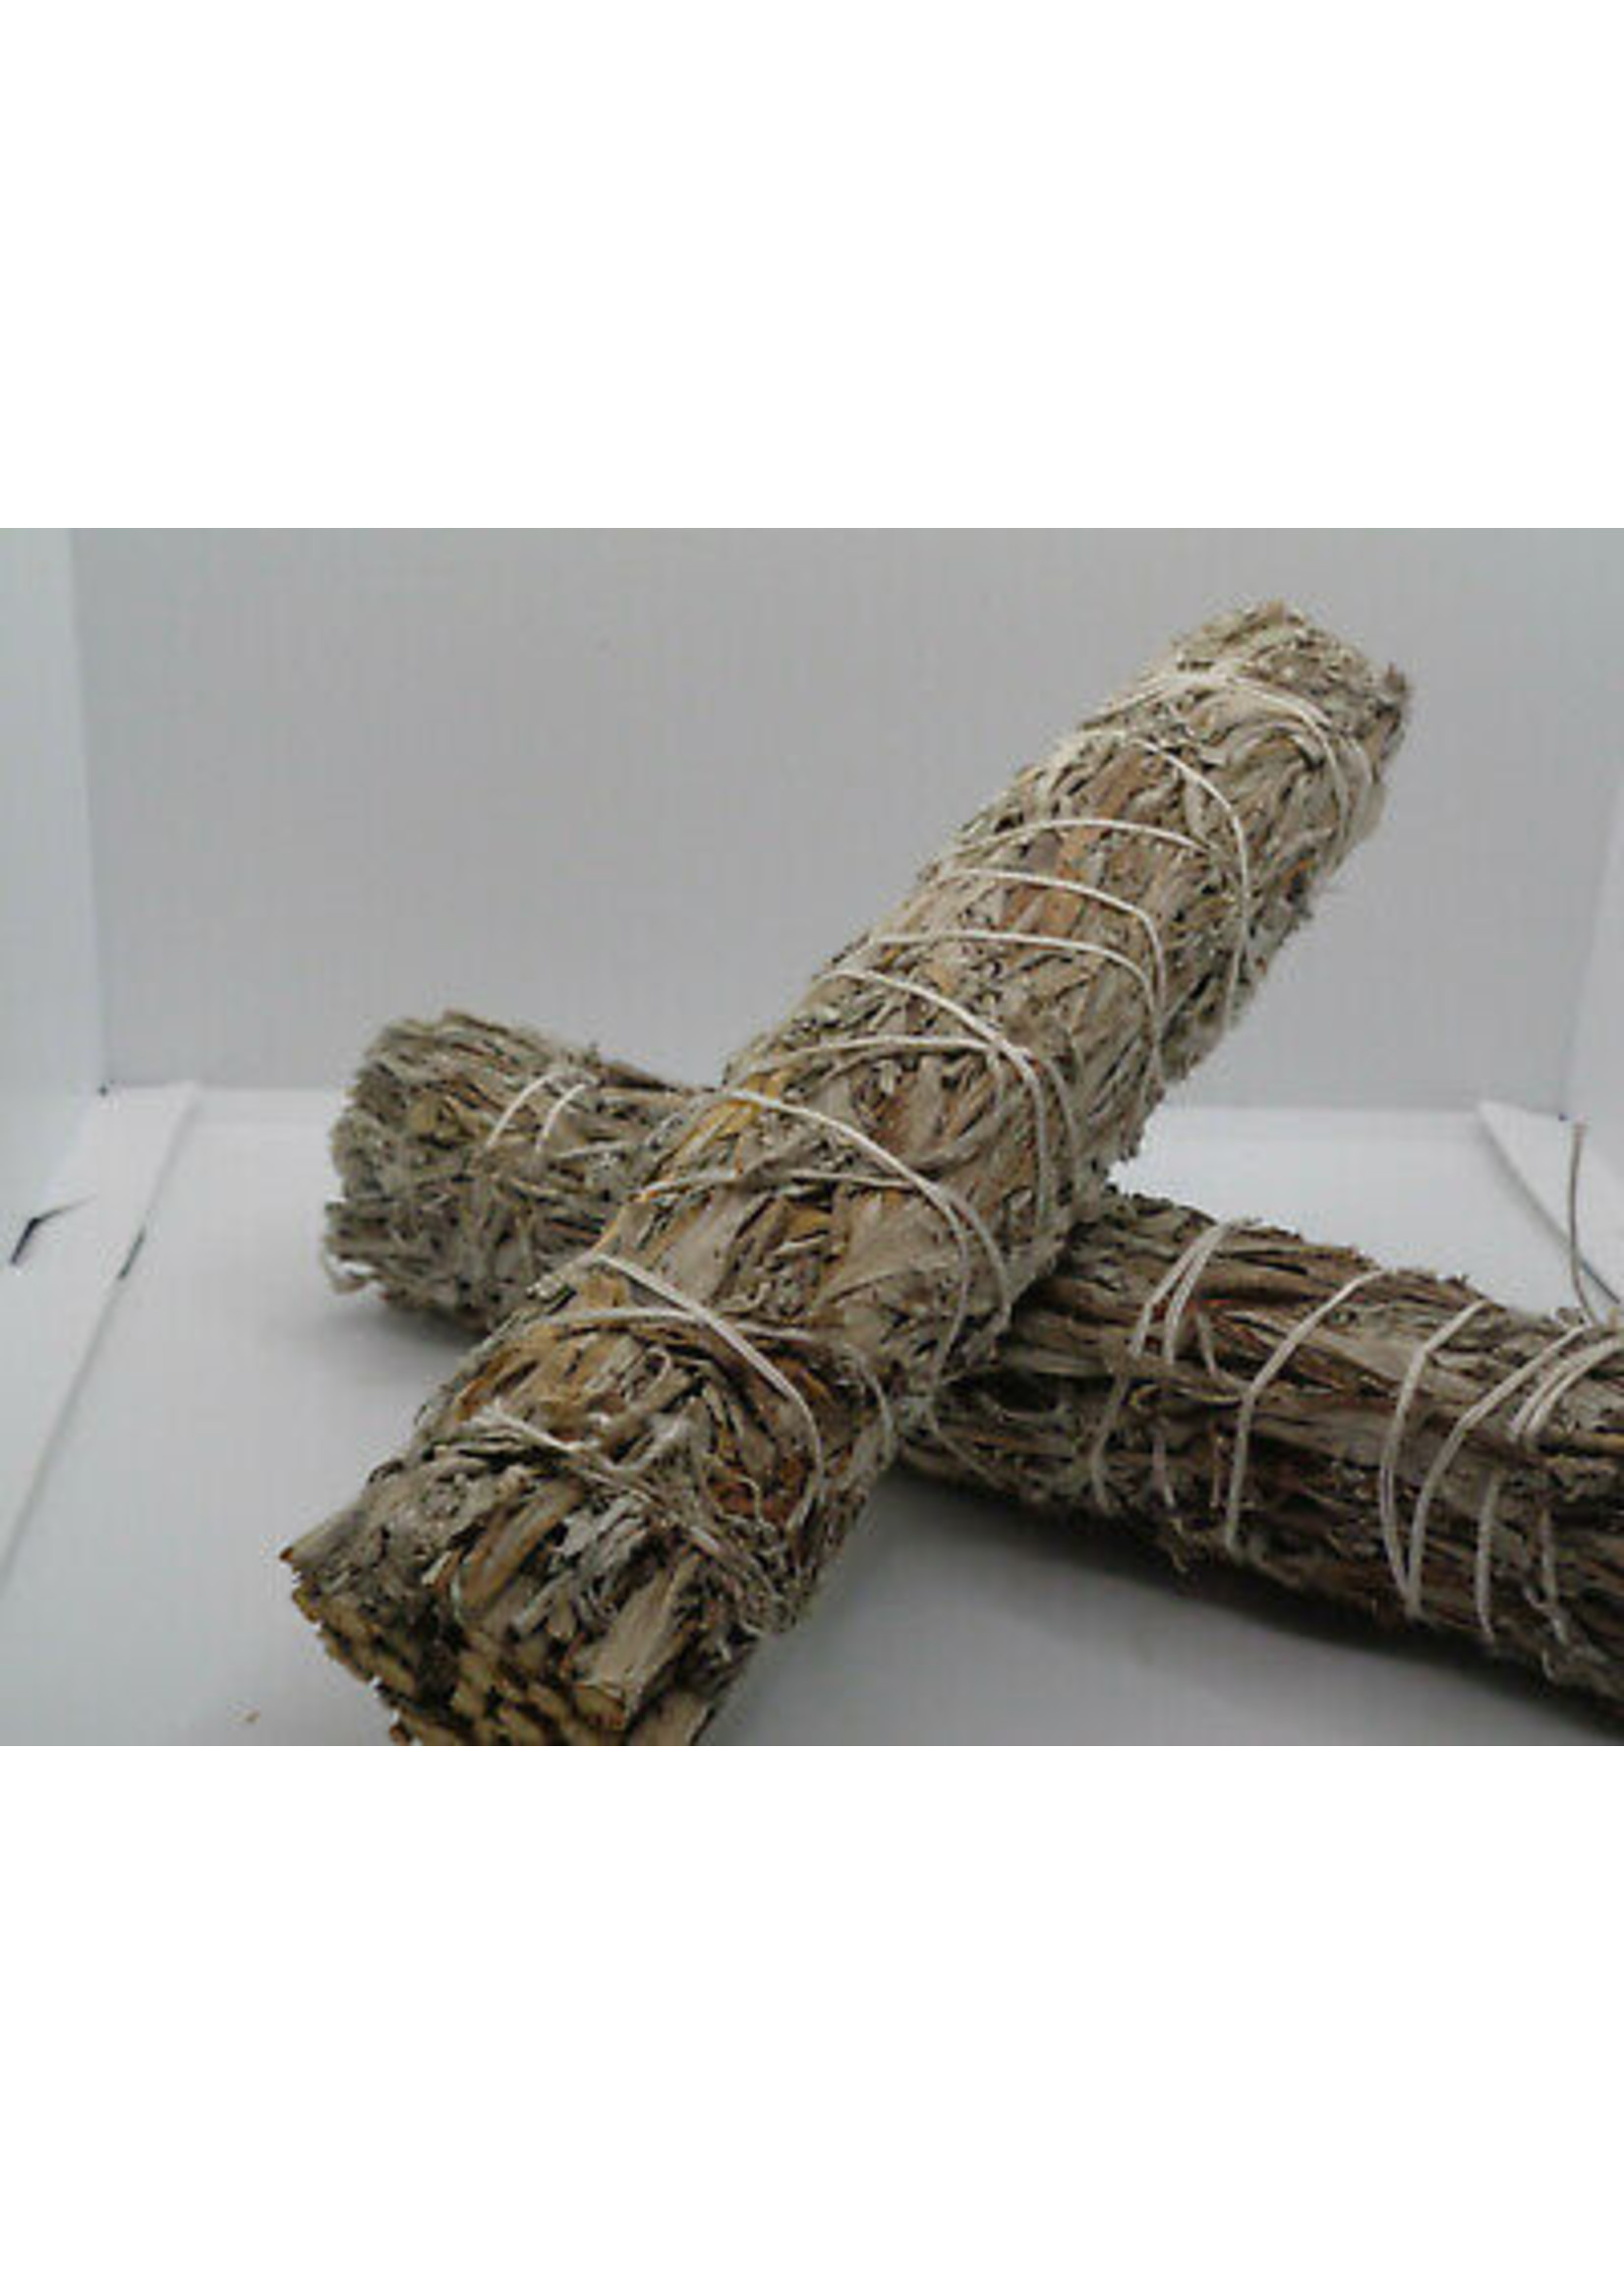 mugwort smudge stick- large 8″-9"- black sage, beneficial for cleansing, purifying, protecting, helps reconnect with our Mother Earth